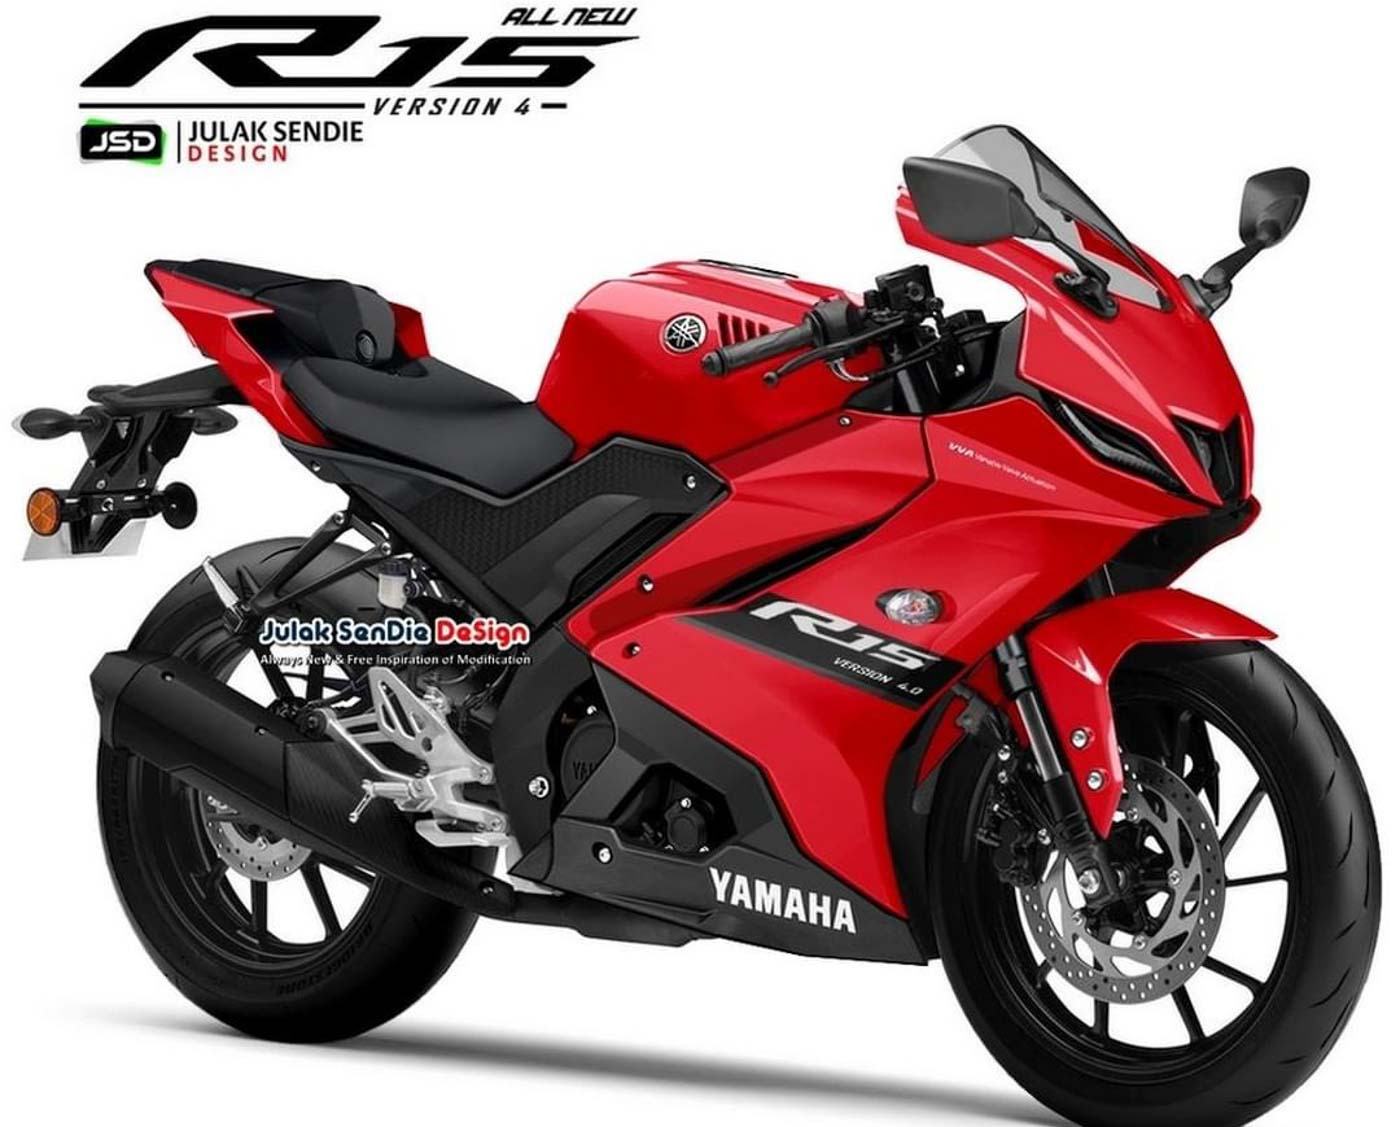 Yamaha R15 V4 Front End Detailed In New Spy Shots; R7 Inspired